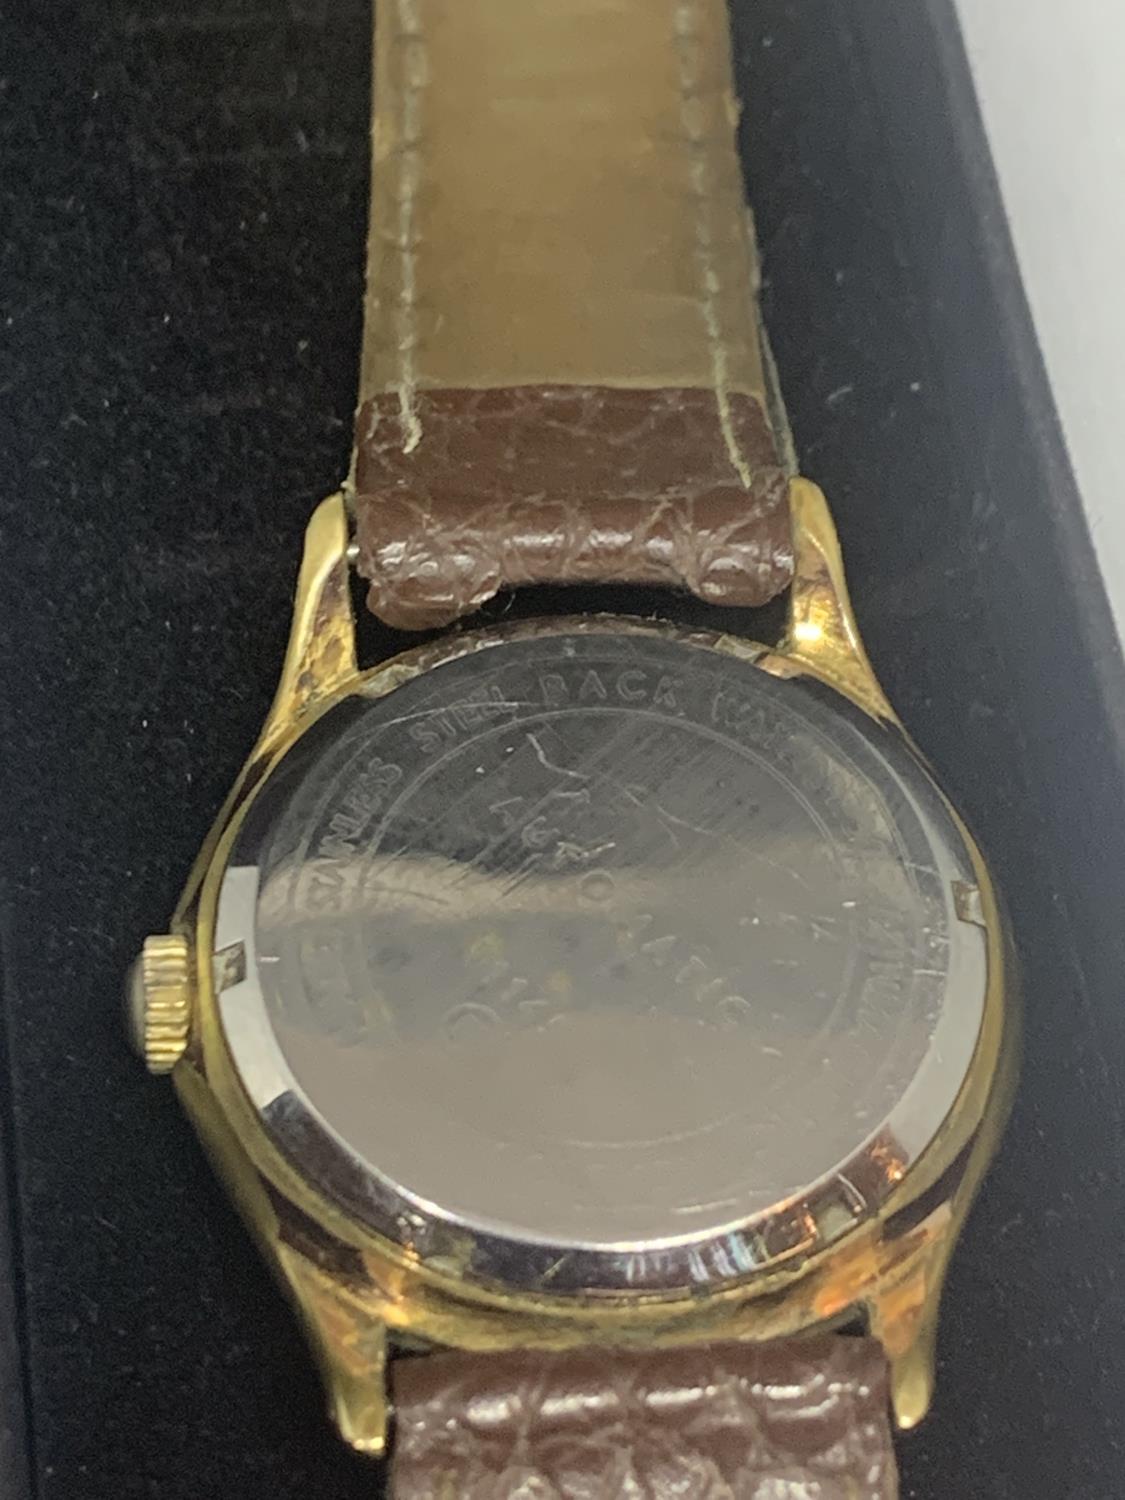 A VINTAGE SULLY SPECIAL 15 JEWEL AUTOMATIC WRIST WATCH WITH BROWN LEATHER STRAP IN A PRESENTATION - Image 3 of 4